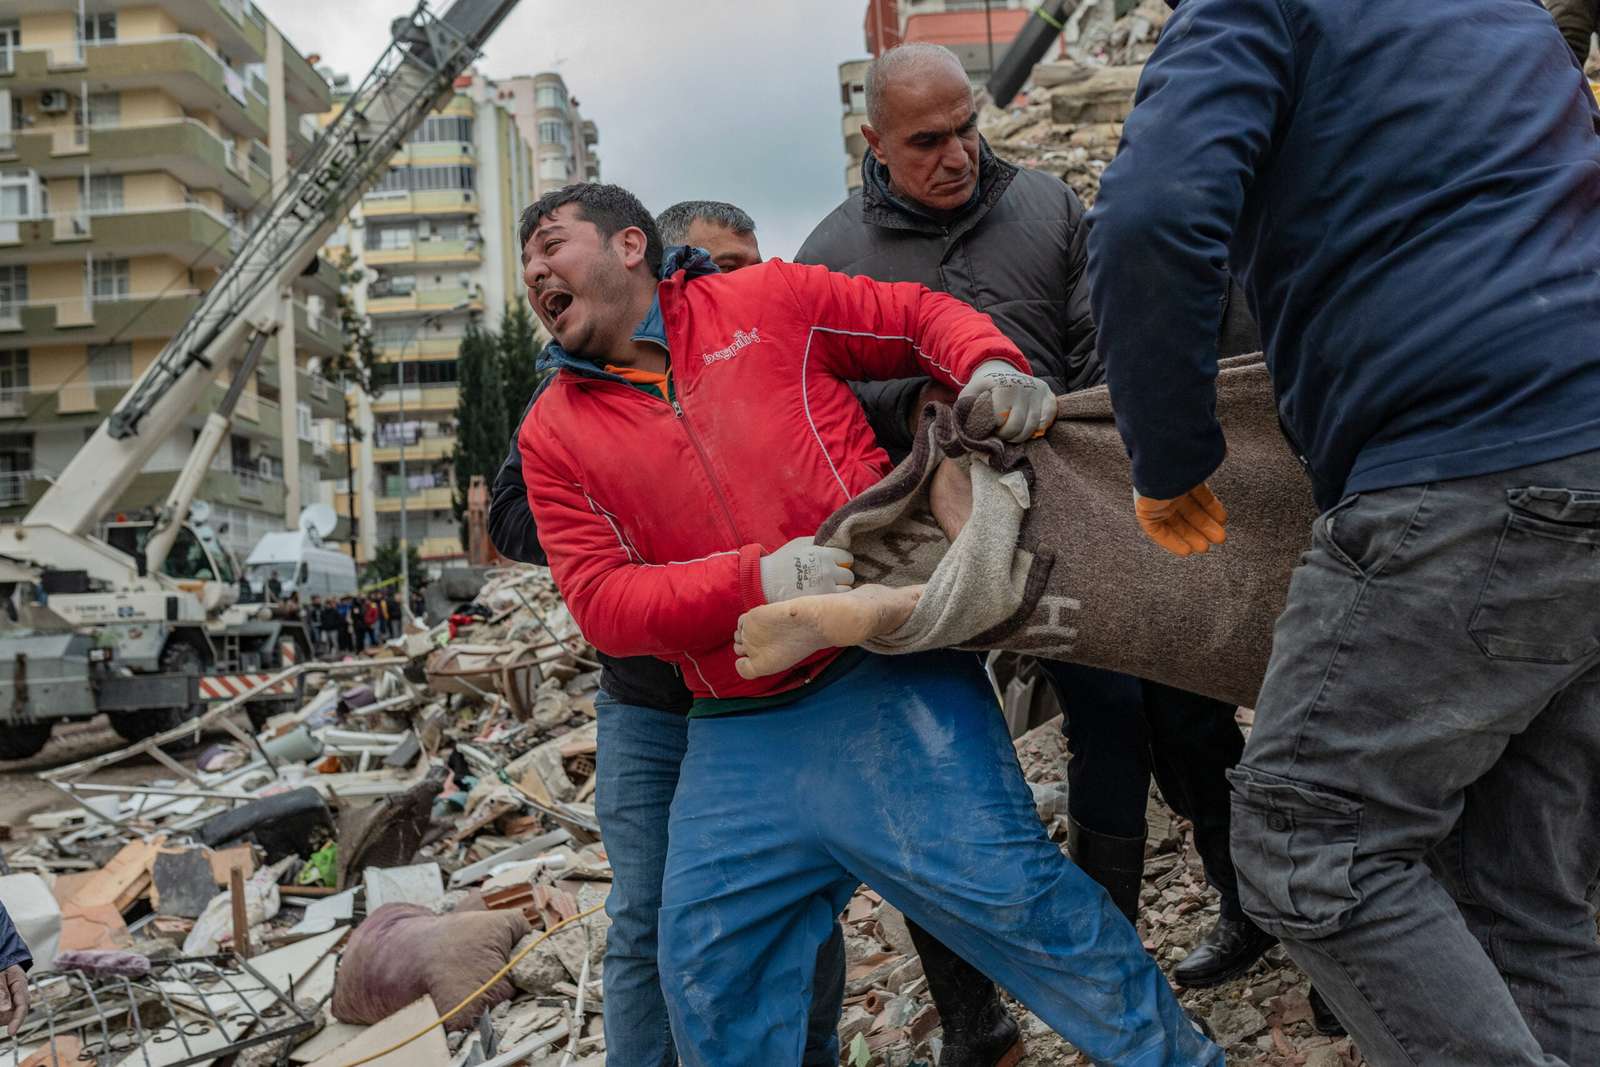 A rescuer reacts as he carries a body found in the rubble in Adana on February 6, 2023, after a 7.8-magnitude earthquake struck the country's south-east. - The combined death toll has risen to over 1,900 for Turkey and Syria after the region's strongest quake in nearly a century on February 6, 2023. Turkey's emergency services said at least 1,121 people died in the 7.8-magnitude earthquake, with another 783 confirmed fatalities in Syria, putting that toll at 1,904. (Photo by Can EROK / AFP)